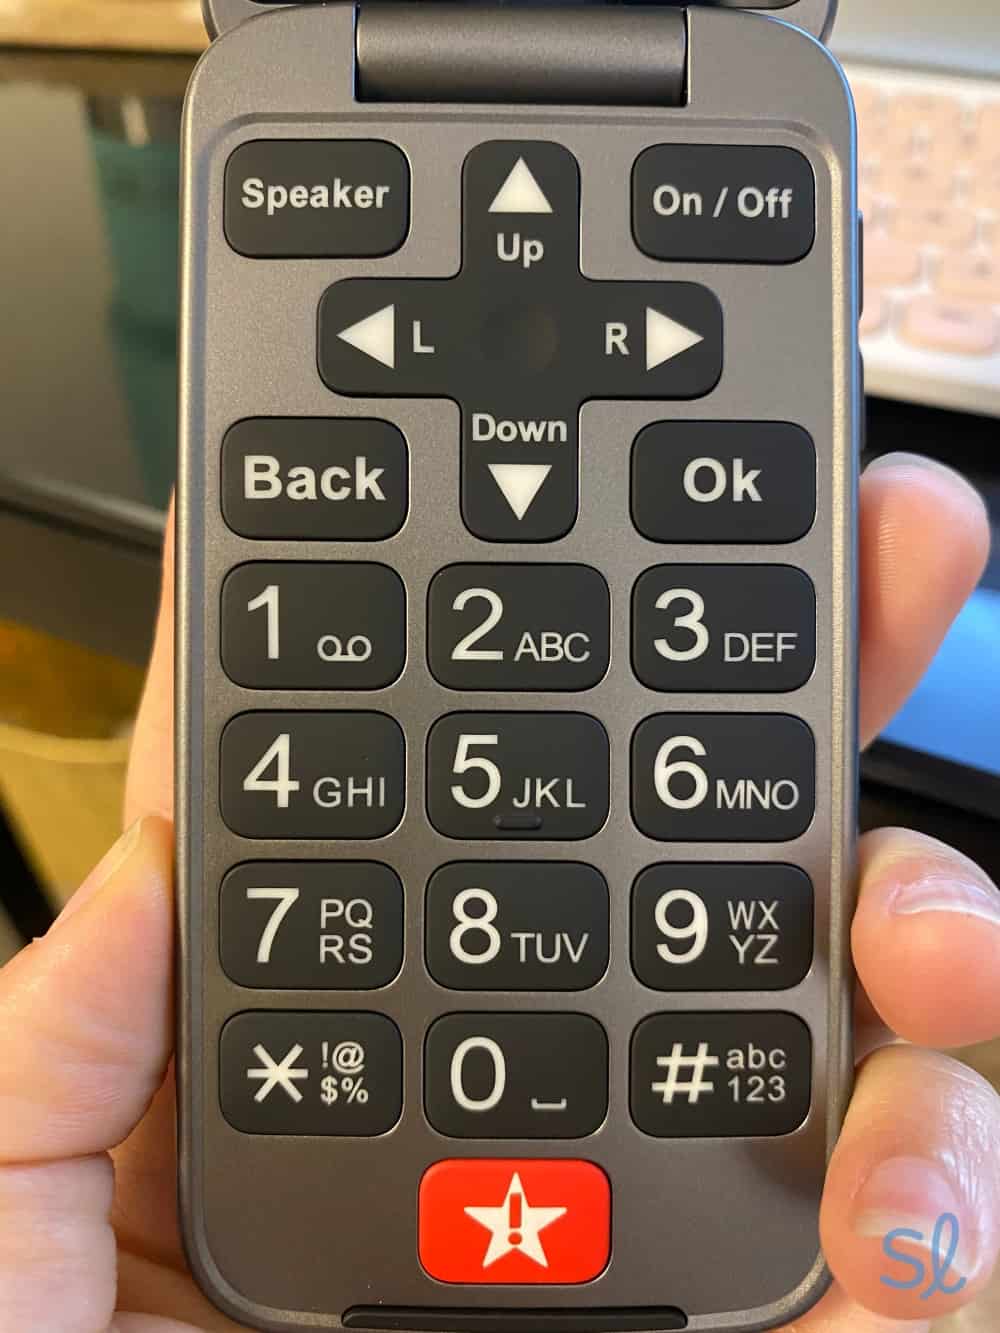 The Lively Flip keypad and Urgent Response button